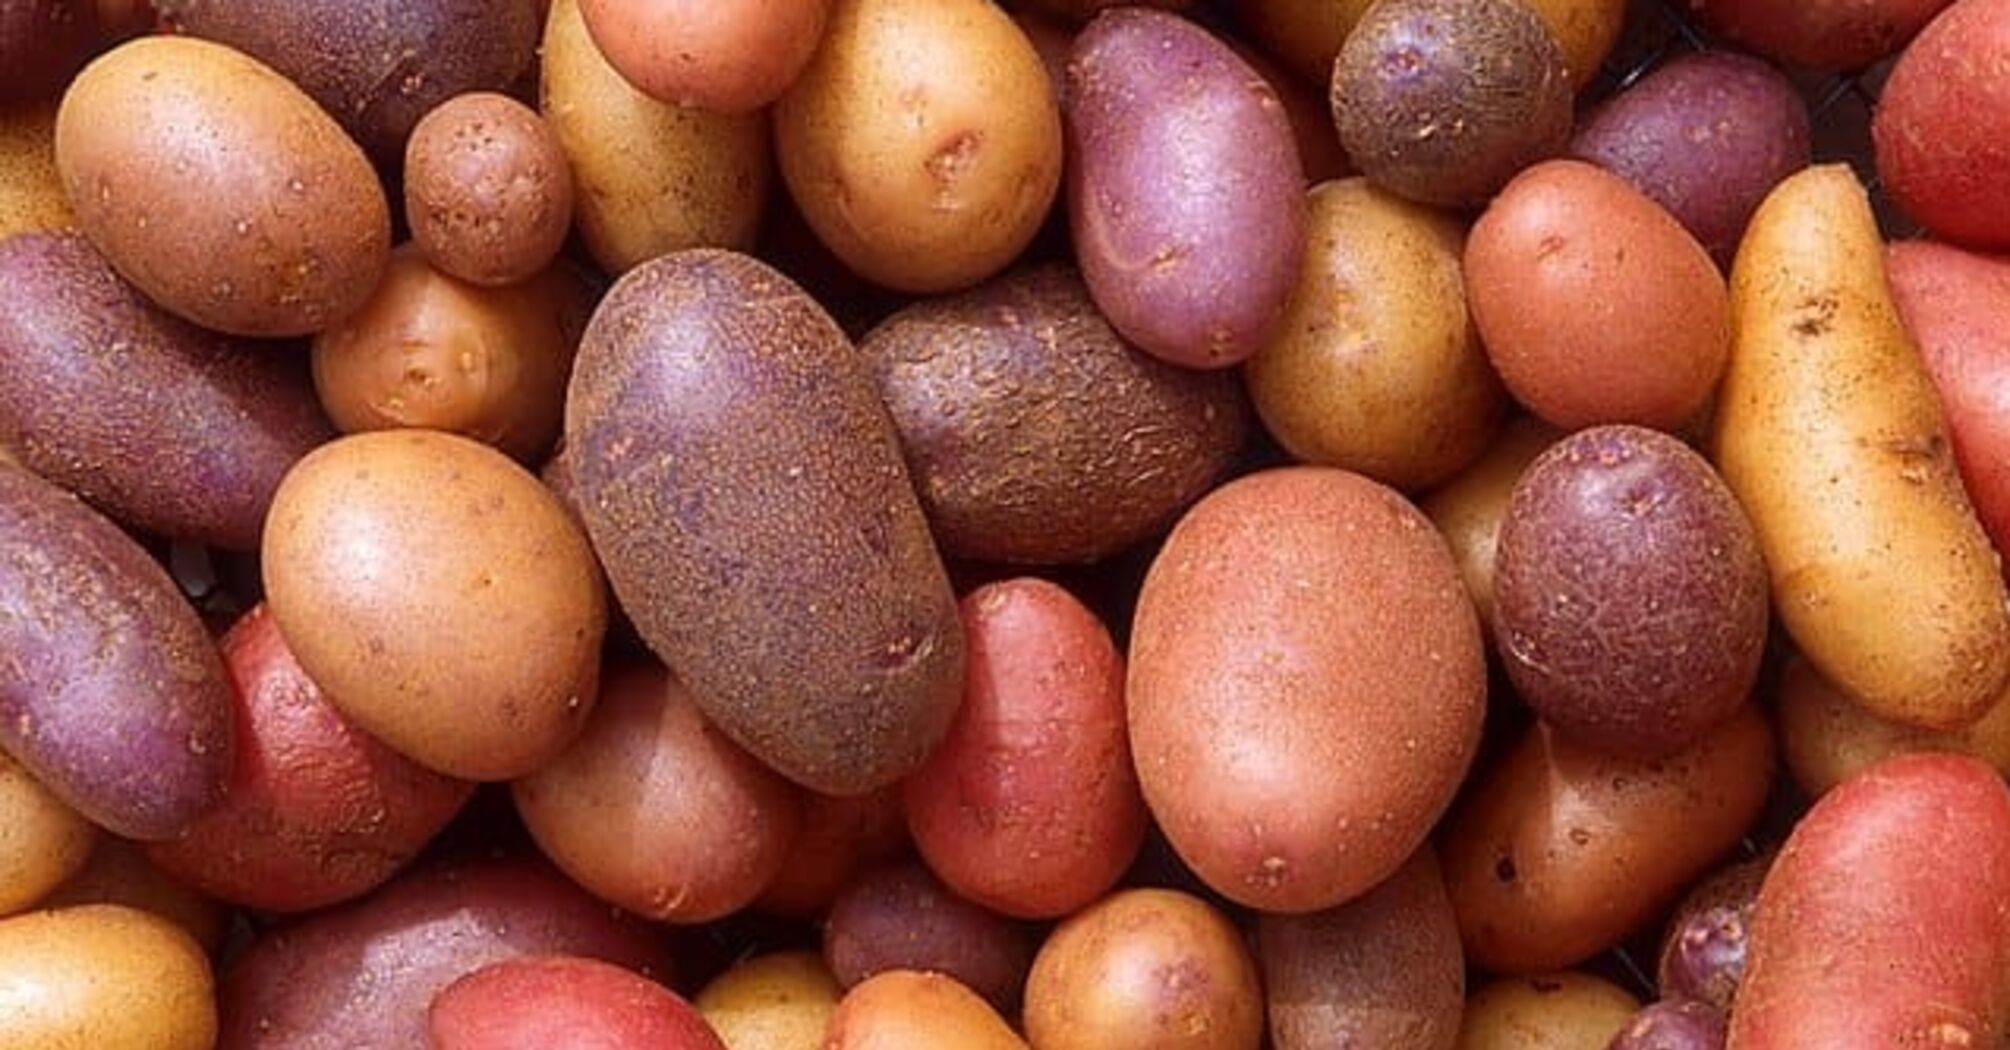 What you didn't know about potatoes